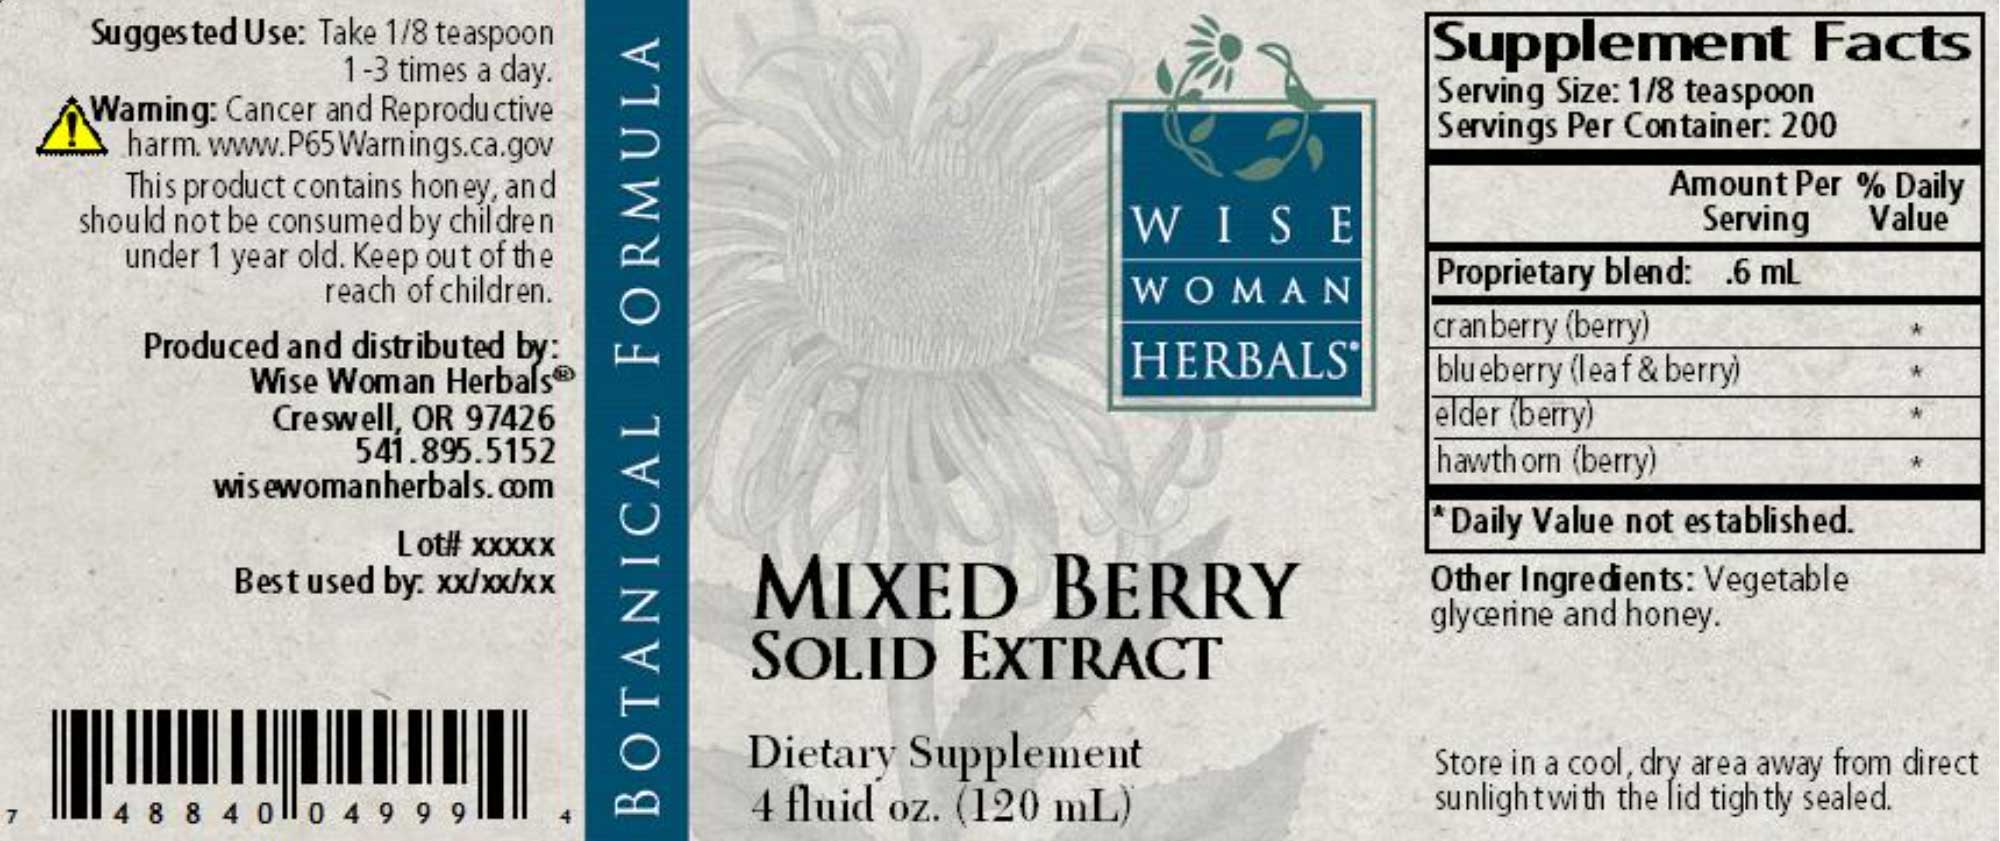 Wise Woman Herbals Mixed Berry Solid Extract LabelWise Woman Herbals Mixed Berry Solid Extract Label